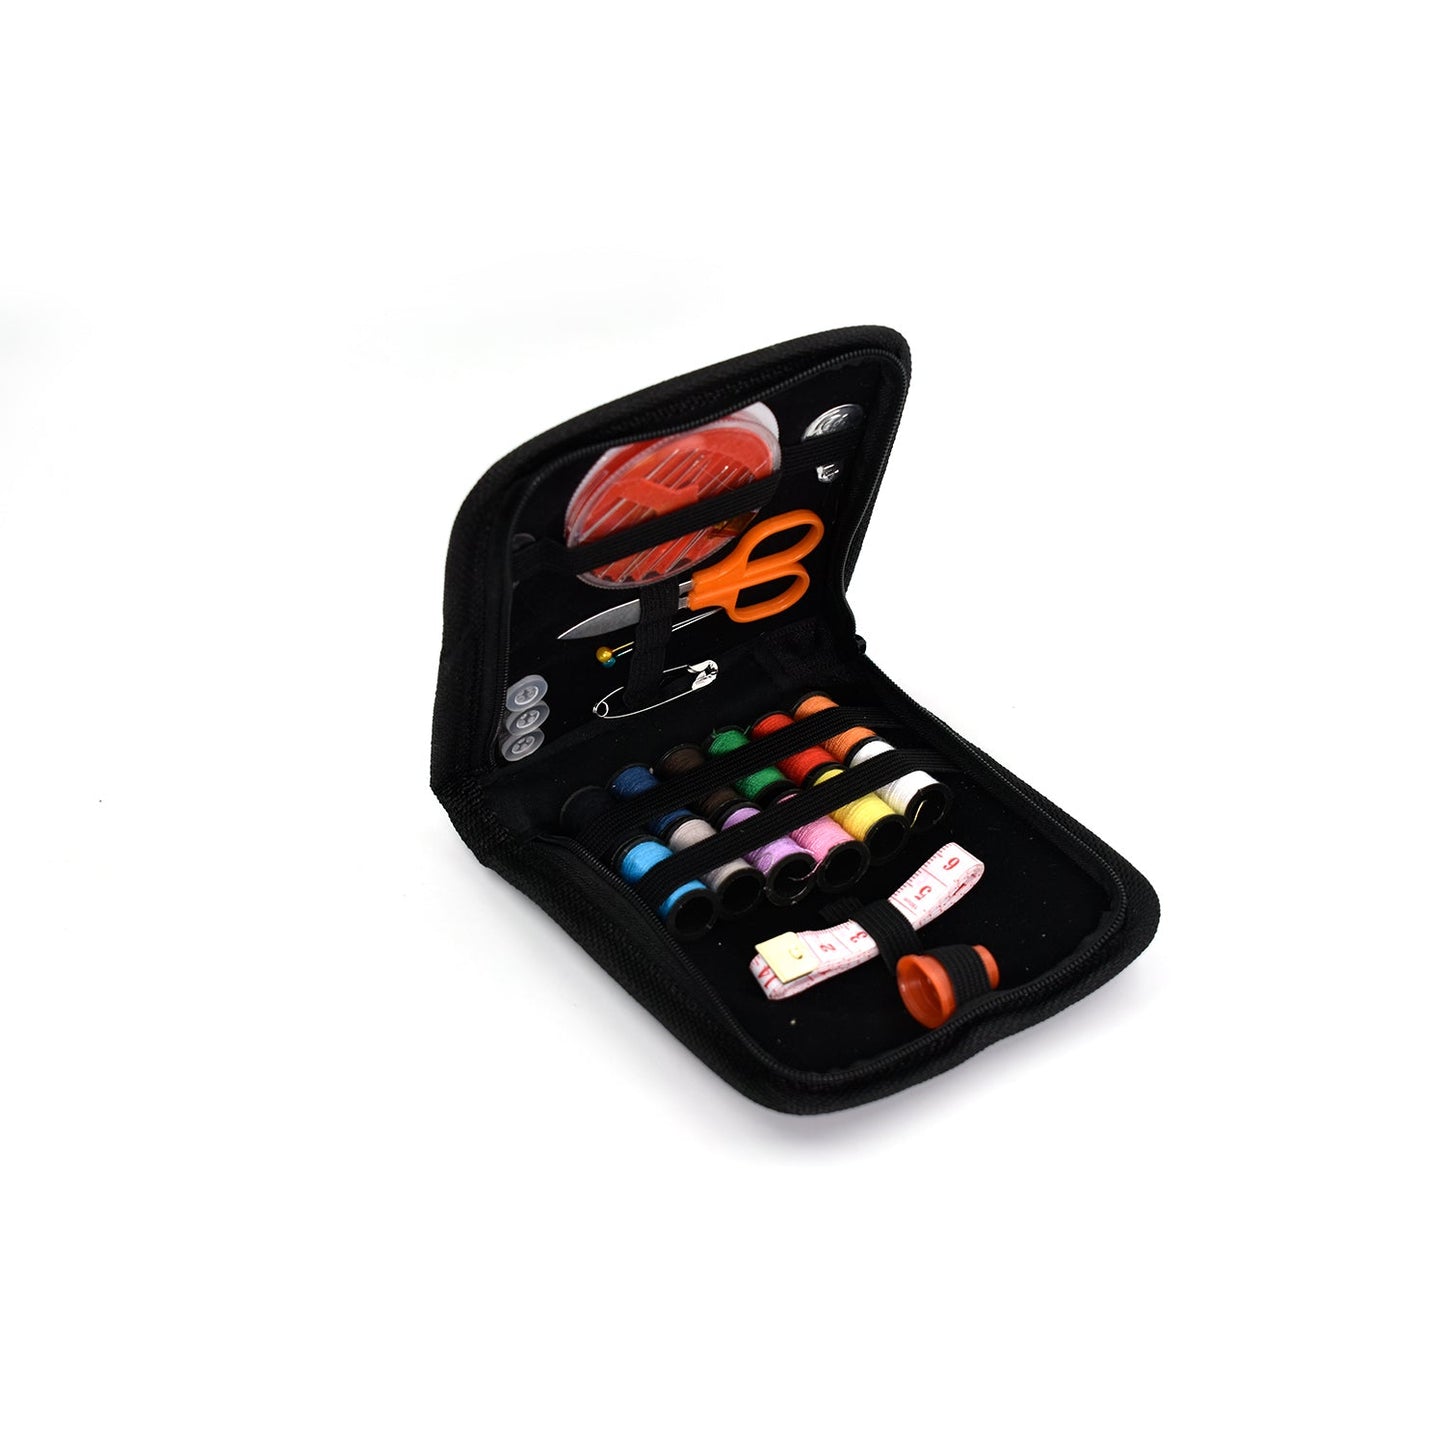 6052A 33Pc Purse Sewing Set For Carrying Various Sewing Items And Stuffs In It. - SWASTIK CREATIONS The Trend Point SWASTIK CREATIONS The Trend Point